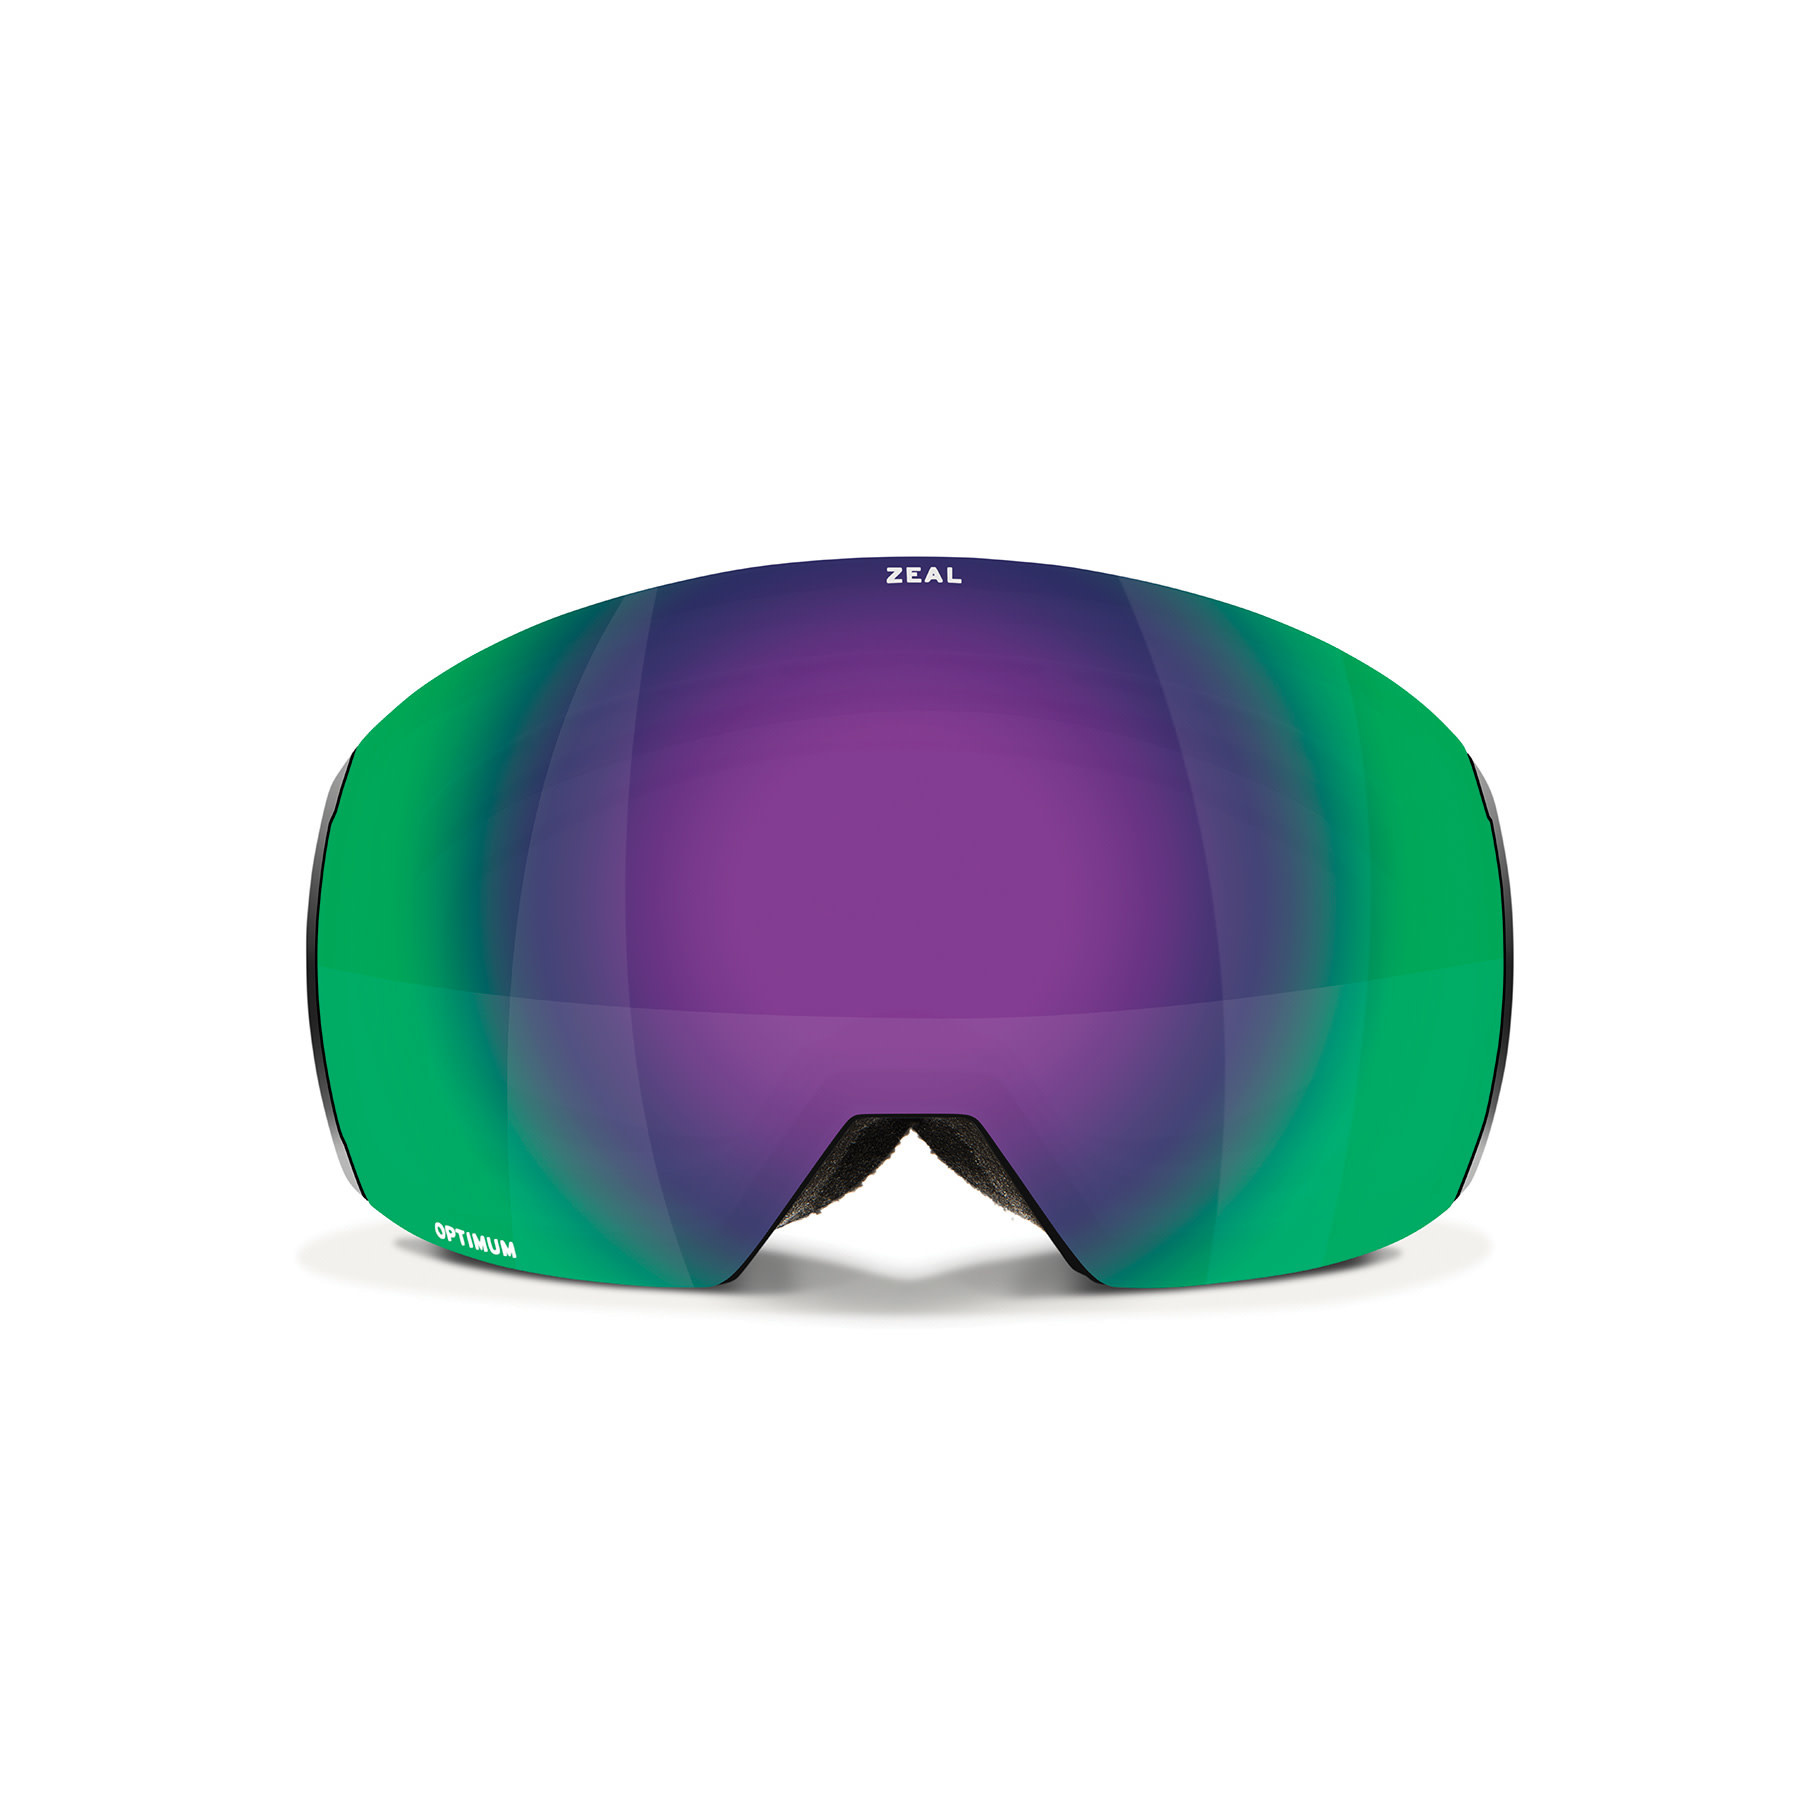 Zeal Portal XL Goggles with Jade Mirror Lens - Ski Town